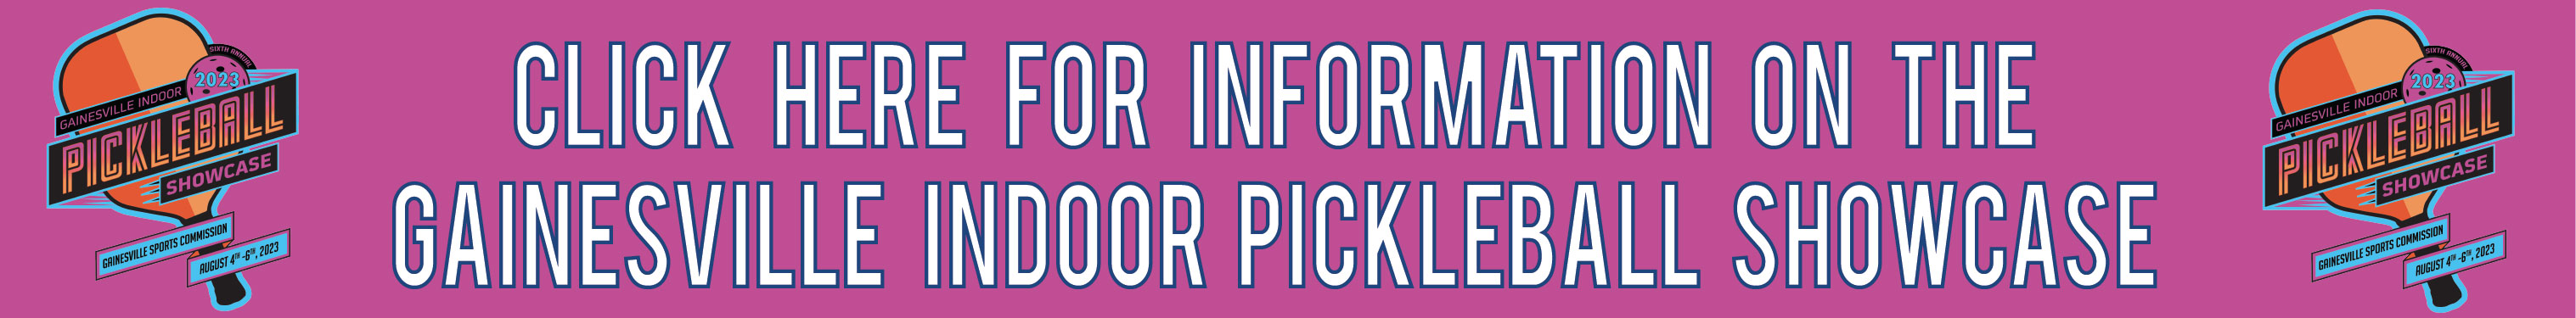 Click Here For Information on the Gainesville Indoor Pickleball Showcase